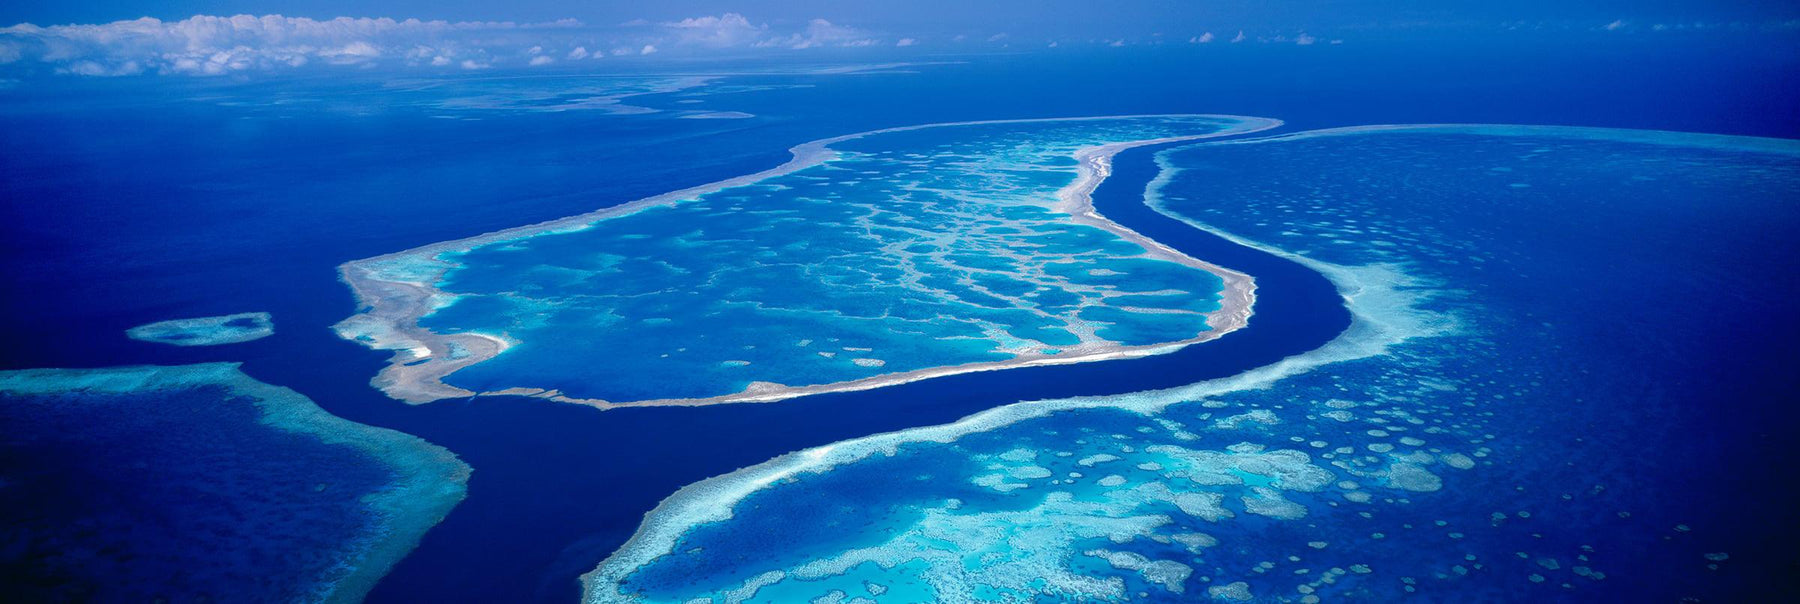 Aerial view of Hardy's Lagoon surrounded by the Great Barrier Reef Australia